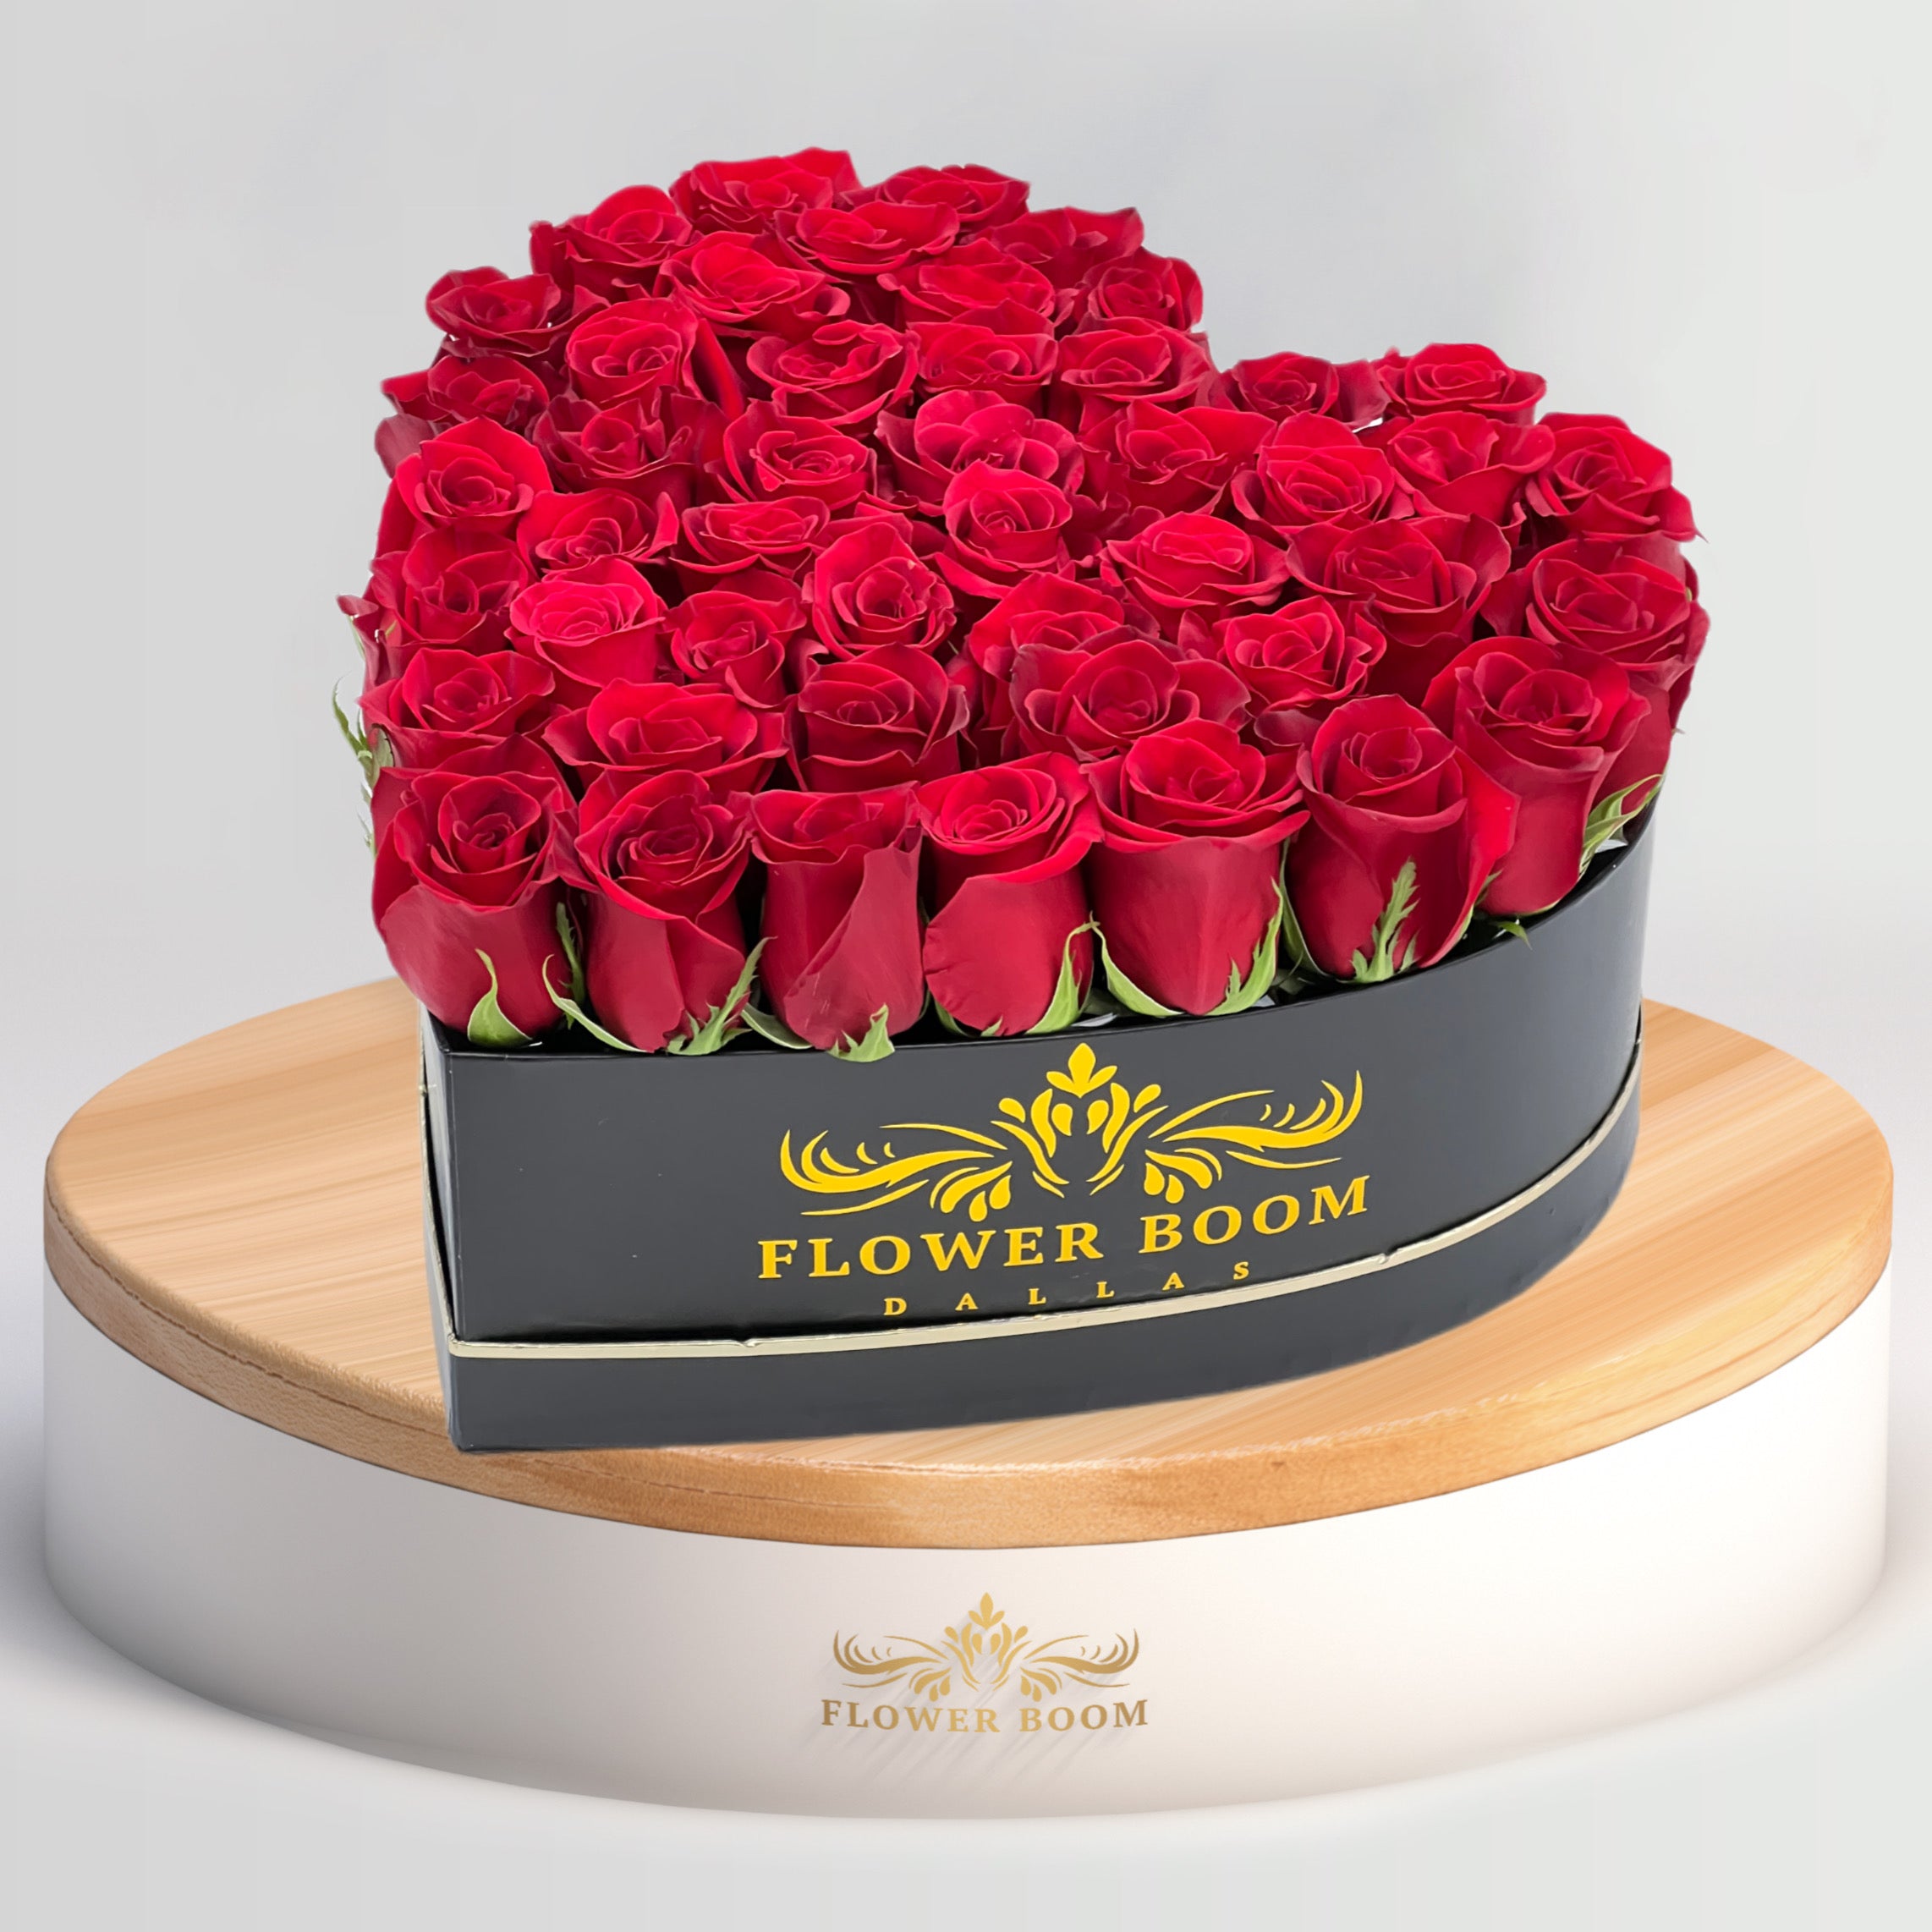 Dear Heart Red Roses Bouquet, Same Day Flower Delivery in Houston/Dallas